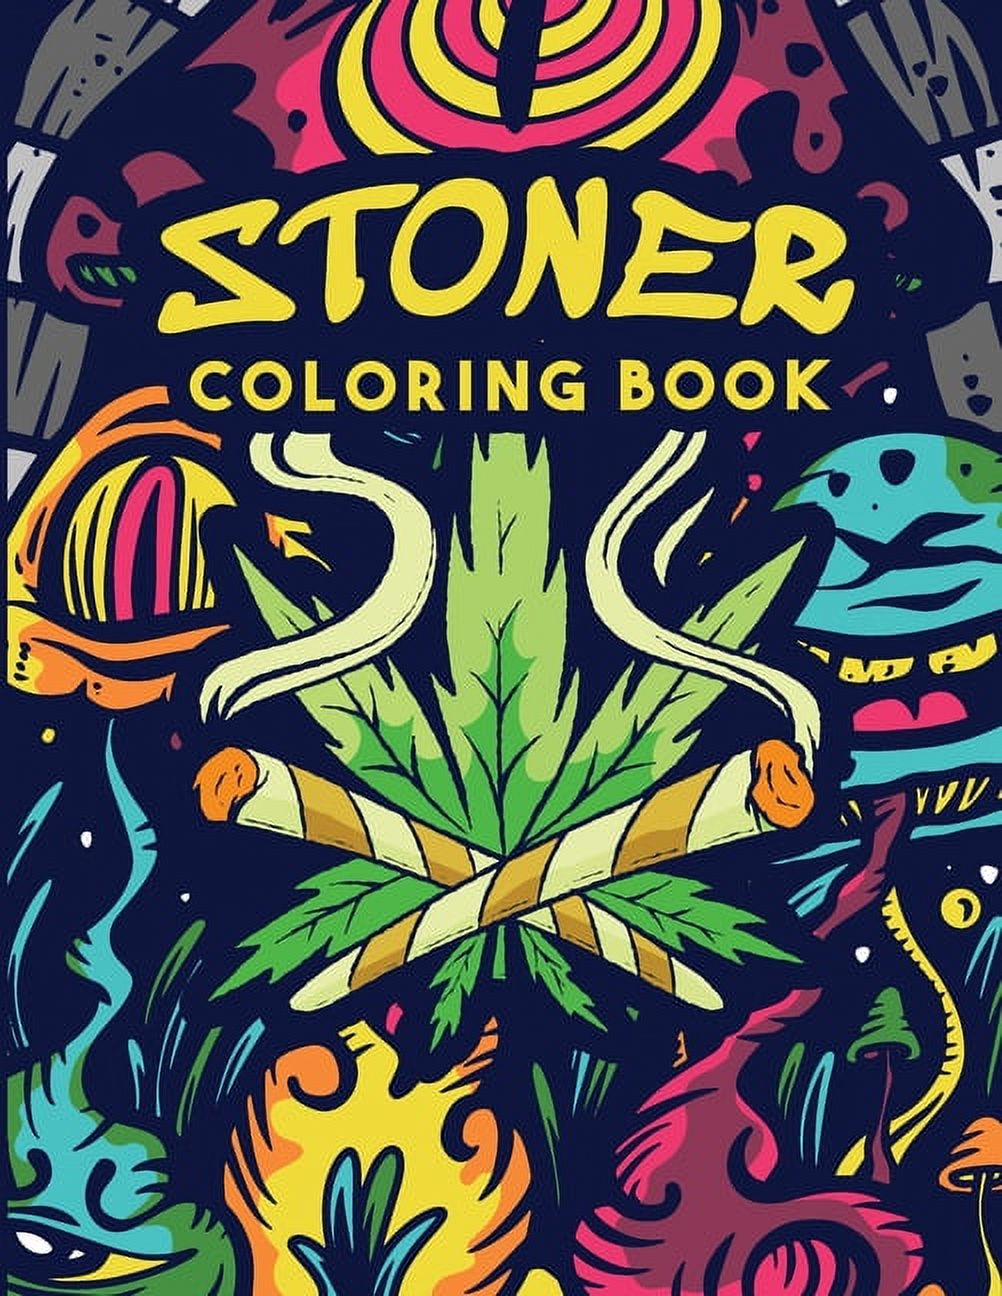 Stoner Coloring Book: Trippy Adult Coloring Book - Stoner's Psychedelic  Coloring Book - Stress Relief - Art Therapy & Relaxation (Paperback) 